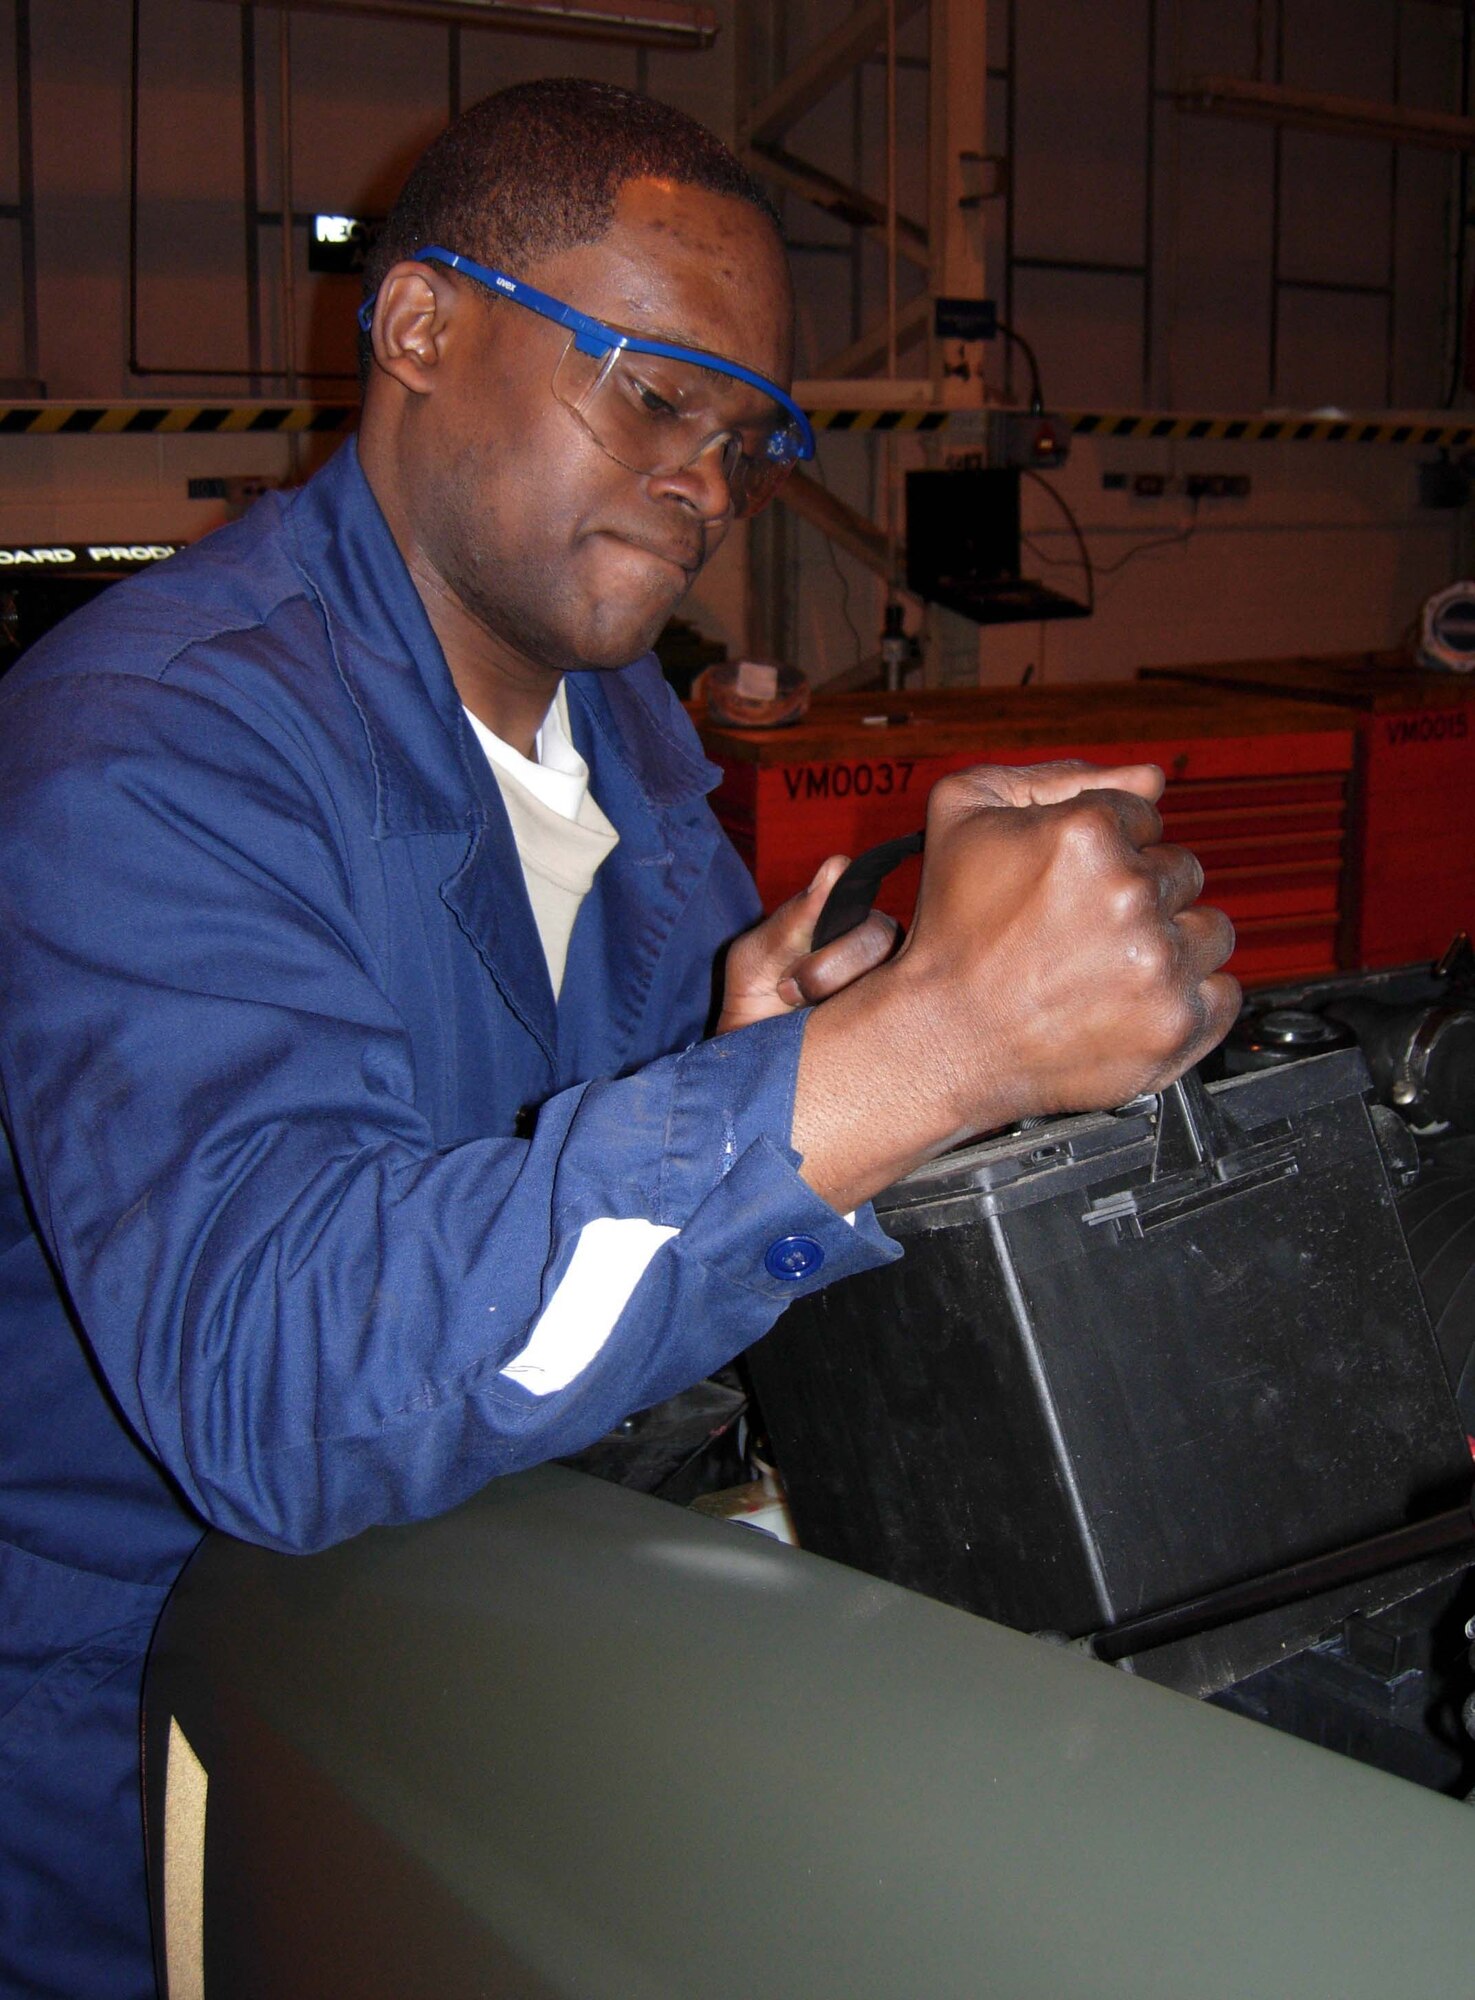 RAF MILDENHALL, England -- Senior Airman Marlon Yarde, 459th Logistics Readiness Squadron vehicle and equipment maintenance journeyman, removes the battery from a Ford Bobtail towing truck during annual tour in support of U.S. Air Forces in Europe taskings April 14. Thirty-one members of the 459th Logistics Readiness Flight, 459th Communications Flight, 459th Mission Support Group and the 69th Aerial Port Squadron spent their annual tour here to support U.S. Air Forces in Europe taskings for the rural area mission, about 80 miles outside of London. (U.S. Air Force photo/Staff Sgt. Amaani Lyle)